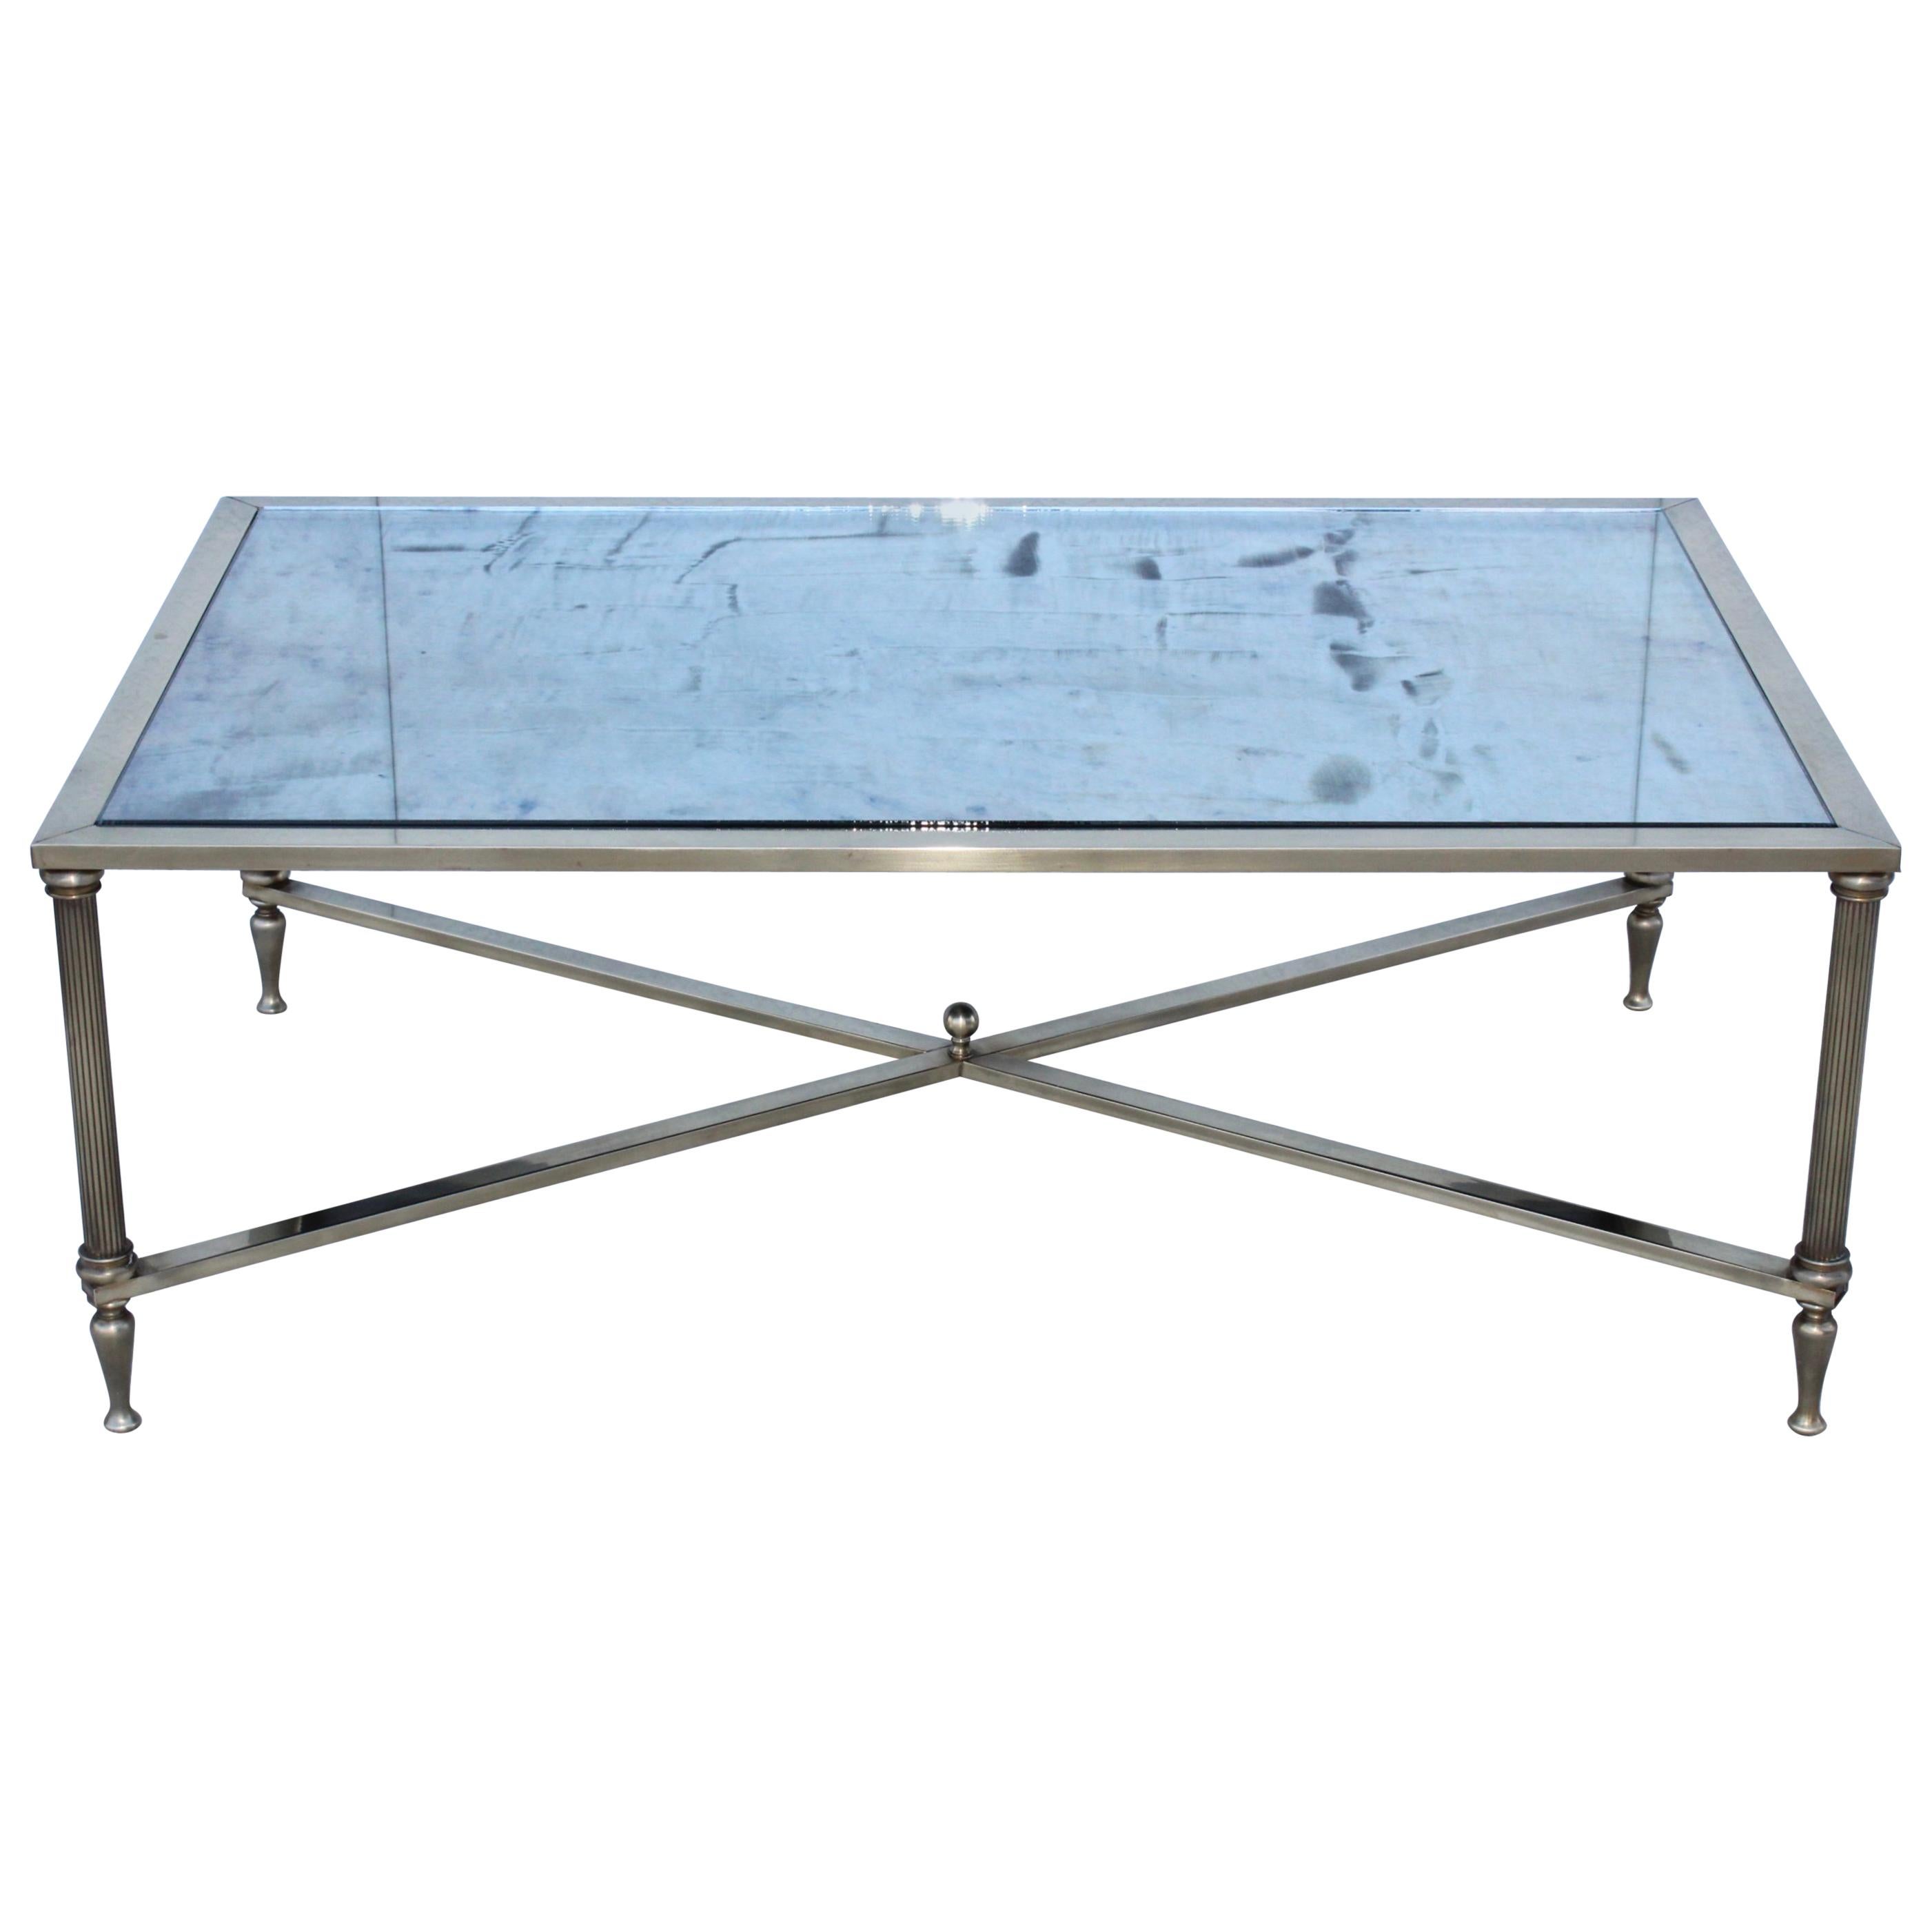 1950s Mid-Century Modern French Brass Coffee Table For Sale